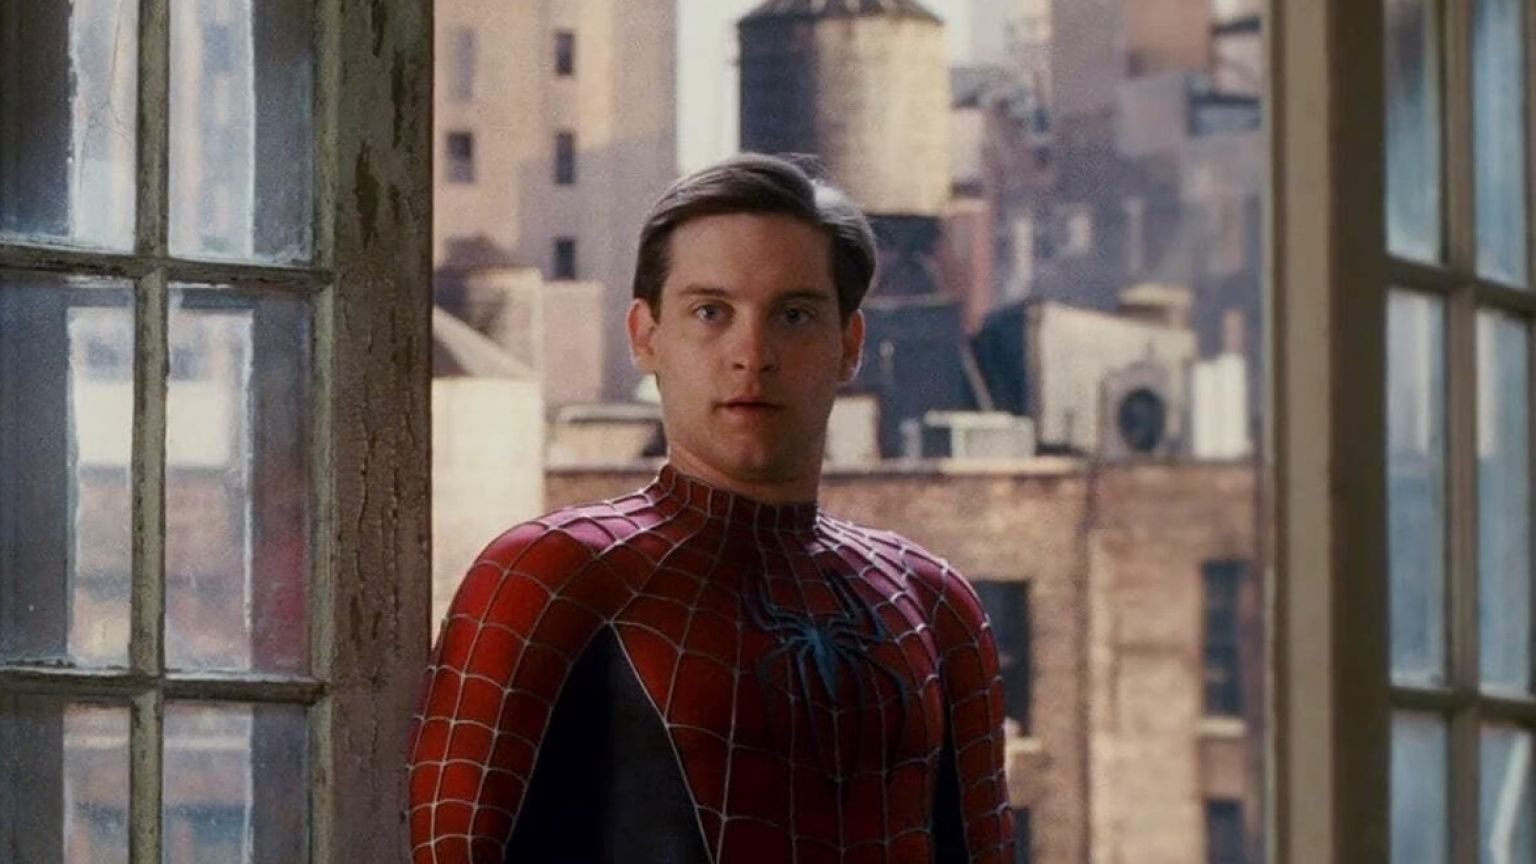 Tobey maguire